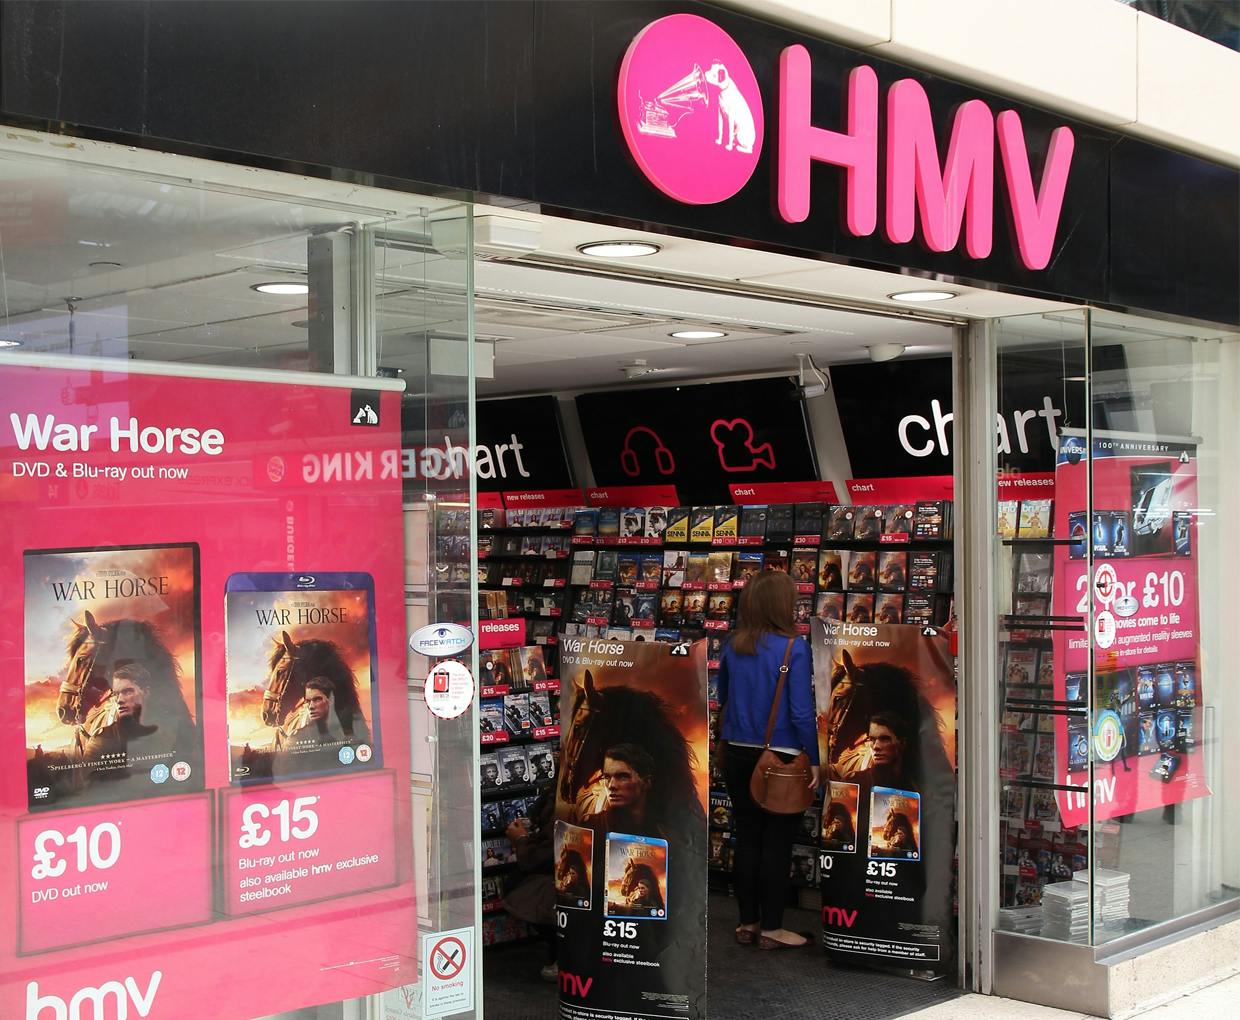 The Hmv Business Has A Buyer But Should The Brand Be Saved